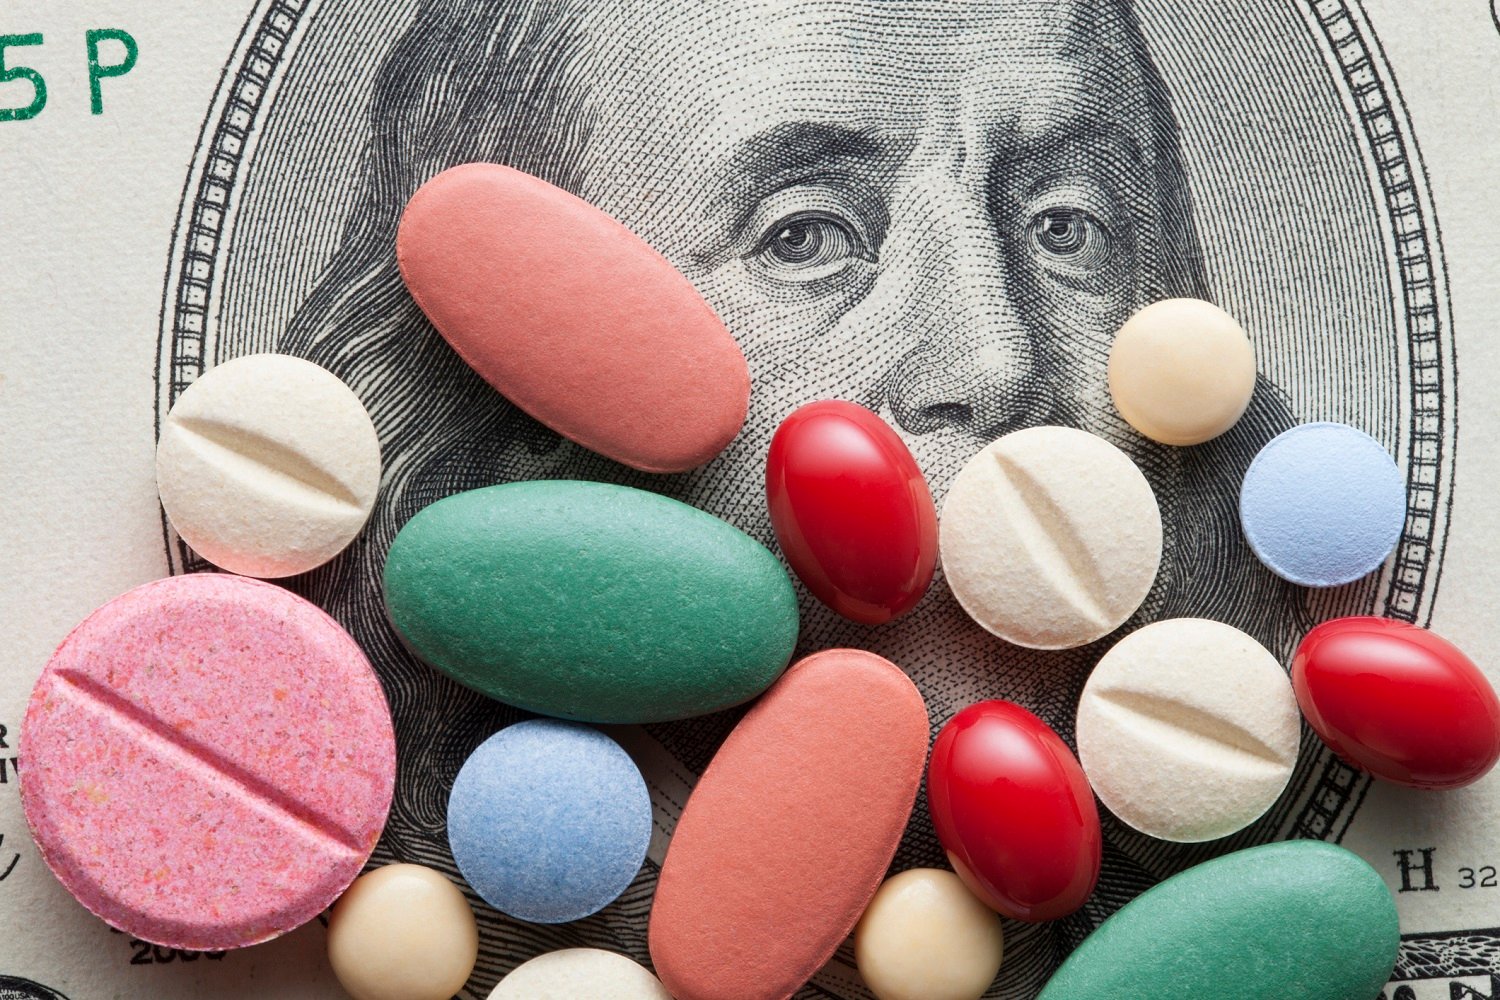 This panel will decide whose medicine to make more affordable. Its choice will be tricky